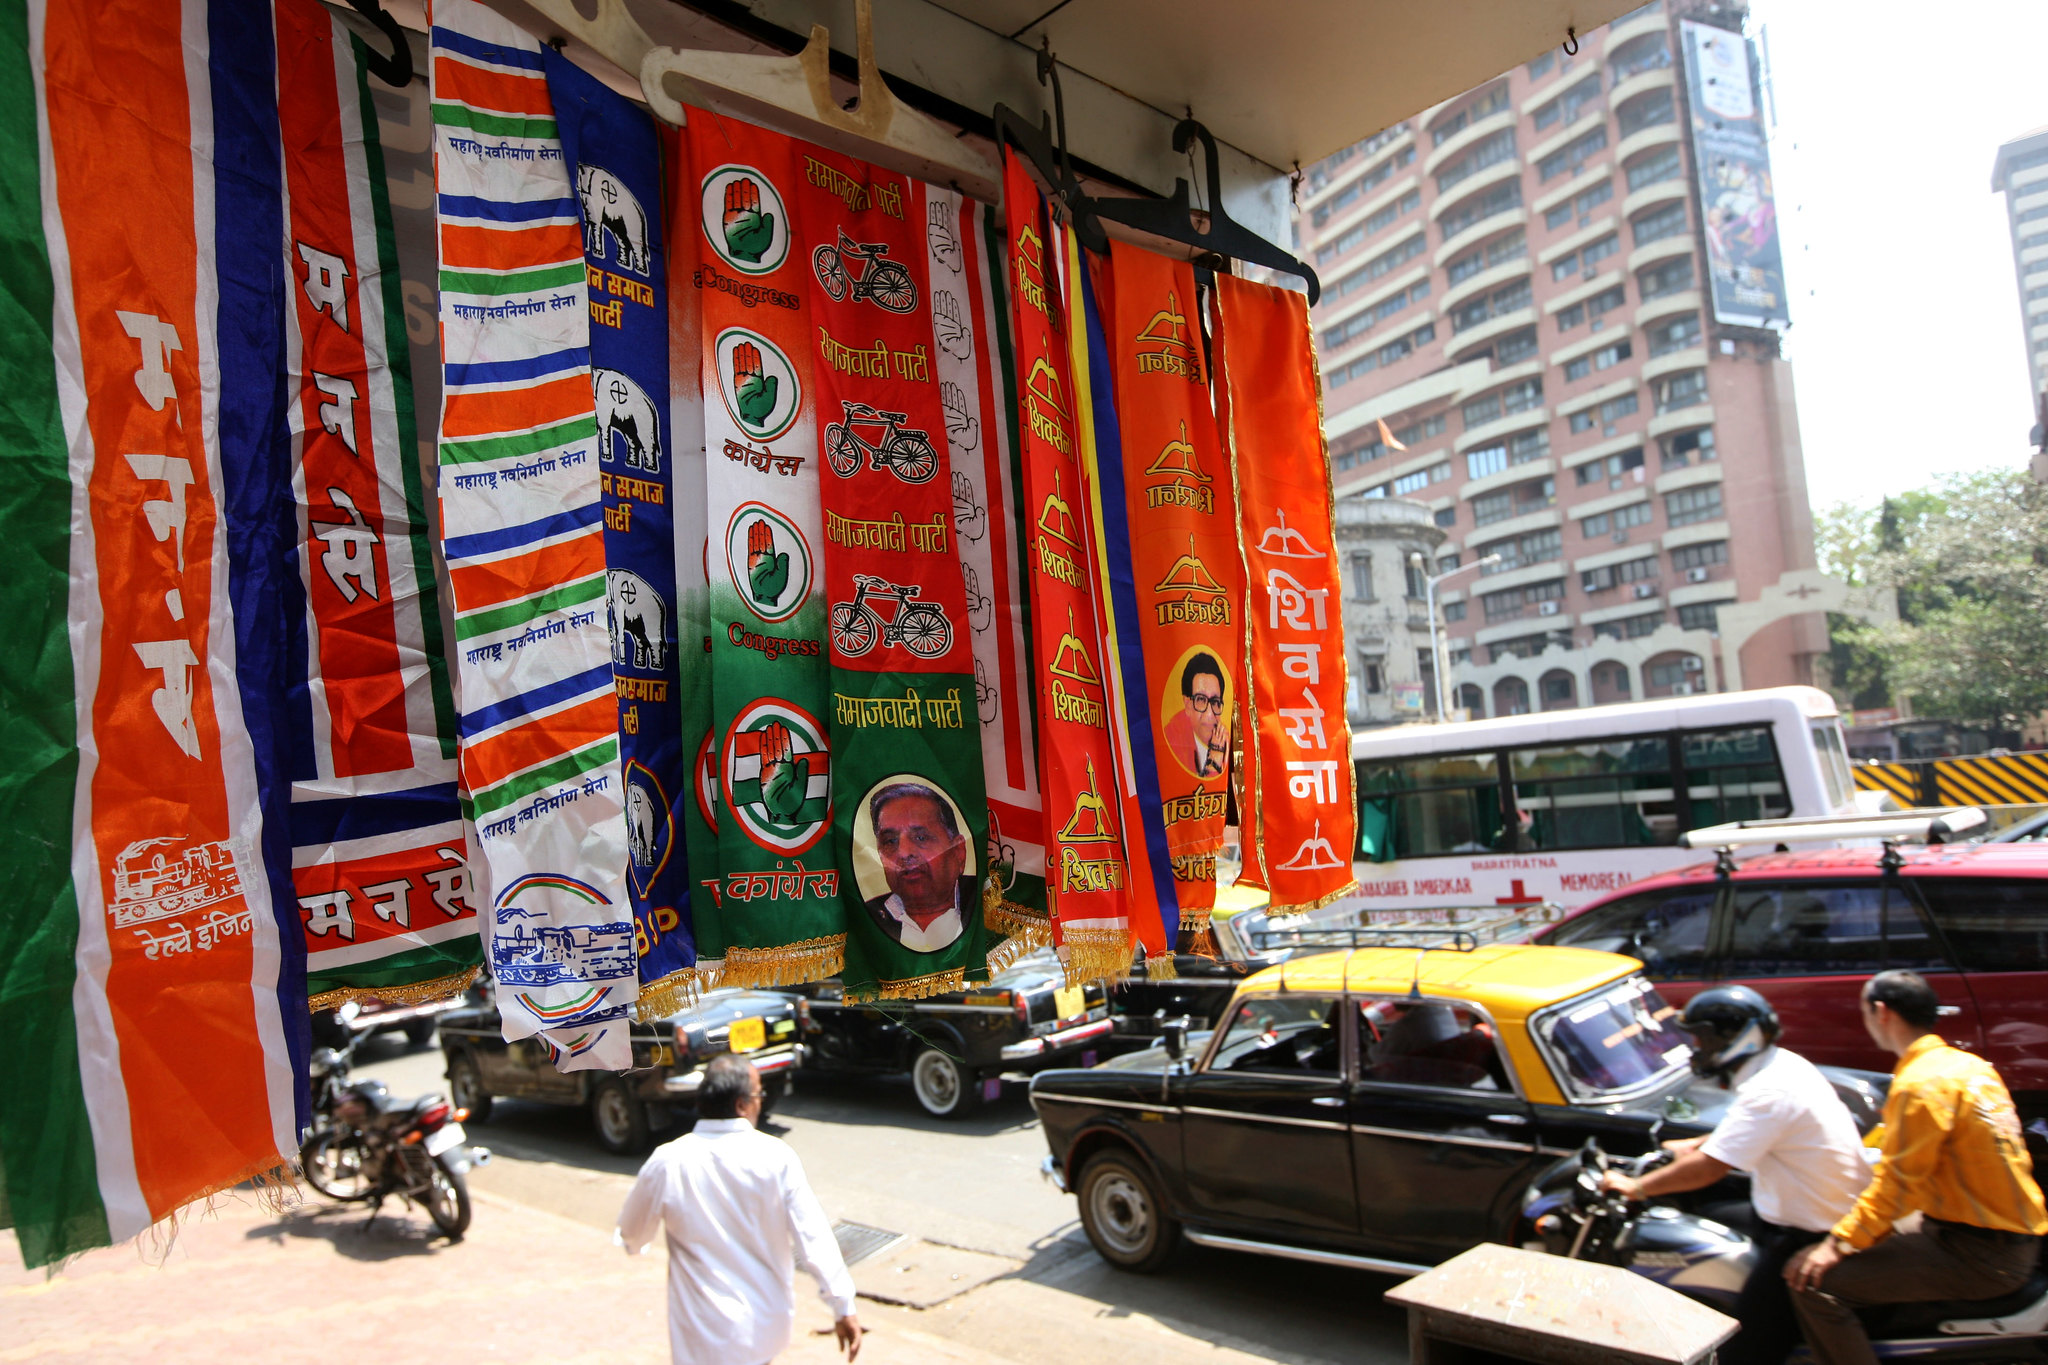 Stoles of different Indian political parties on display in a shop in Mumbai. Stoles are popular among the political leaders and their supporters. Credit: @AlJazeeraEnglish on Flickr   